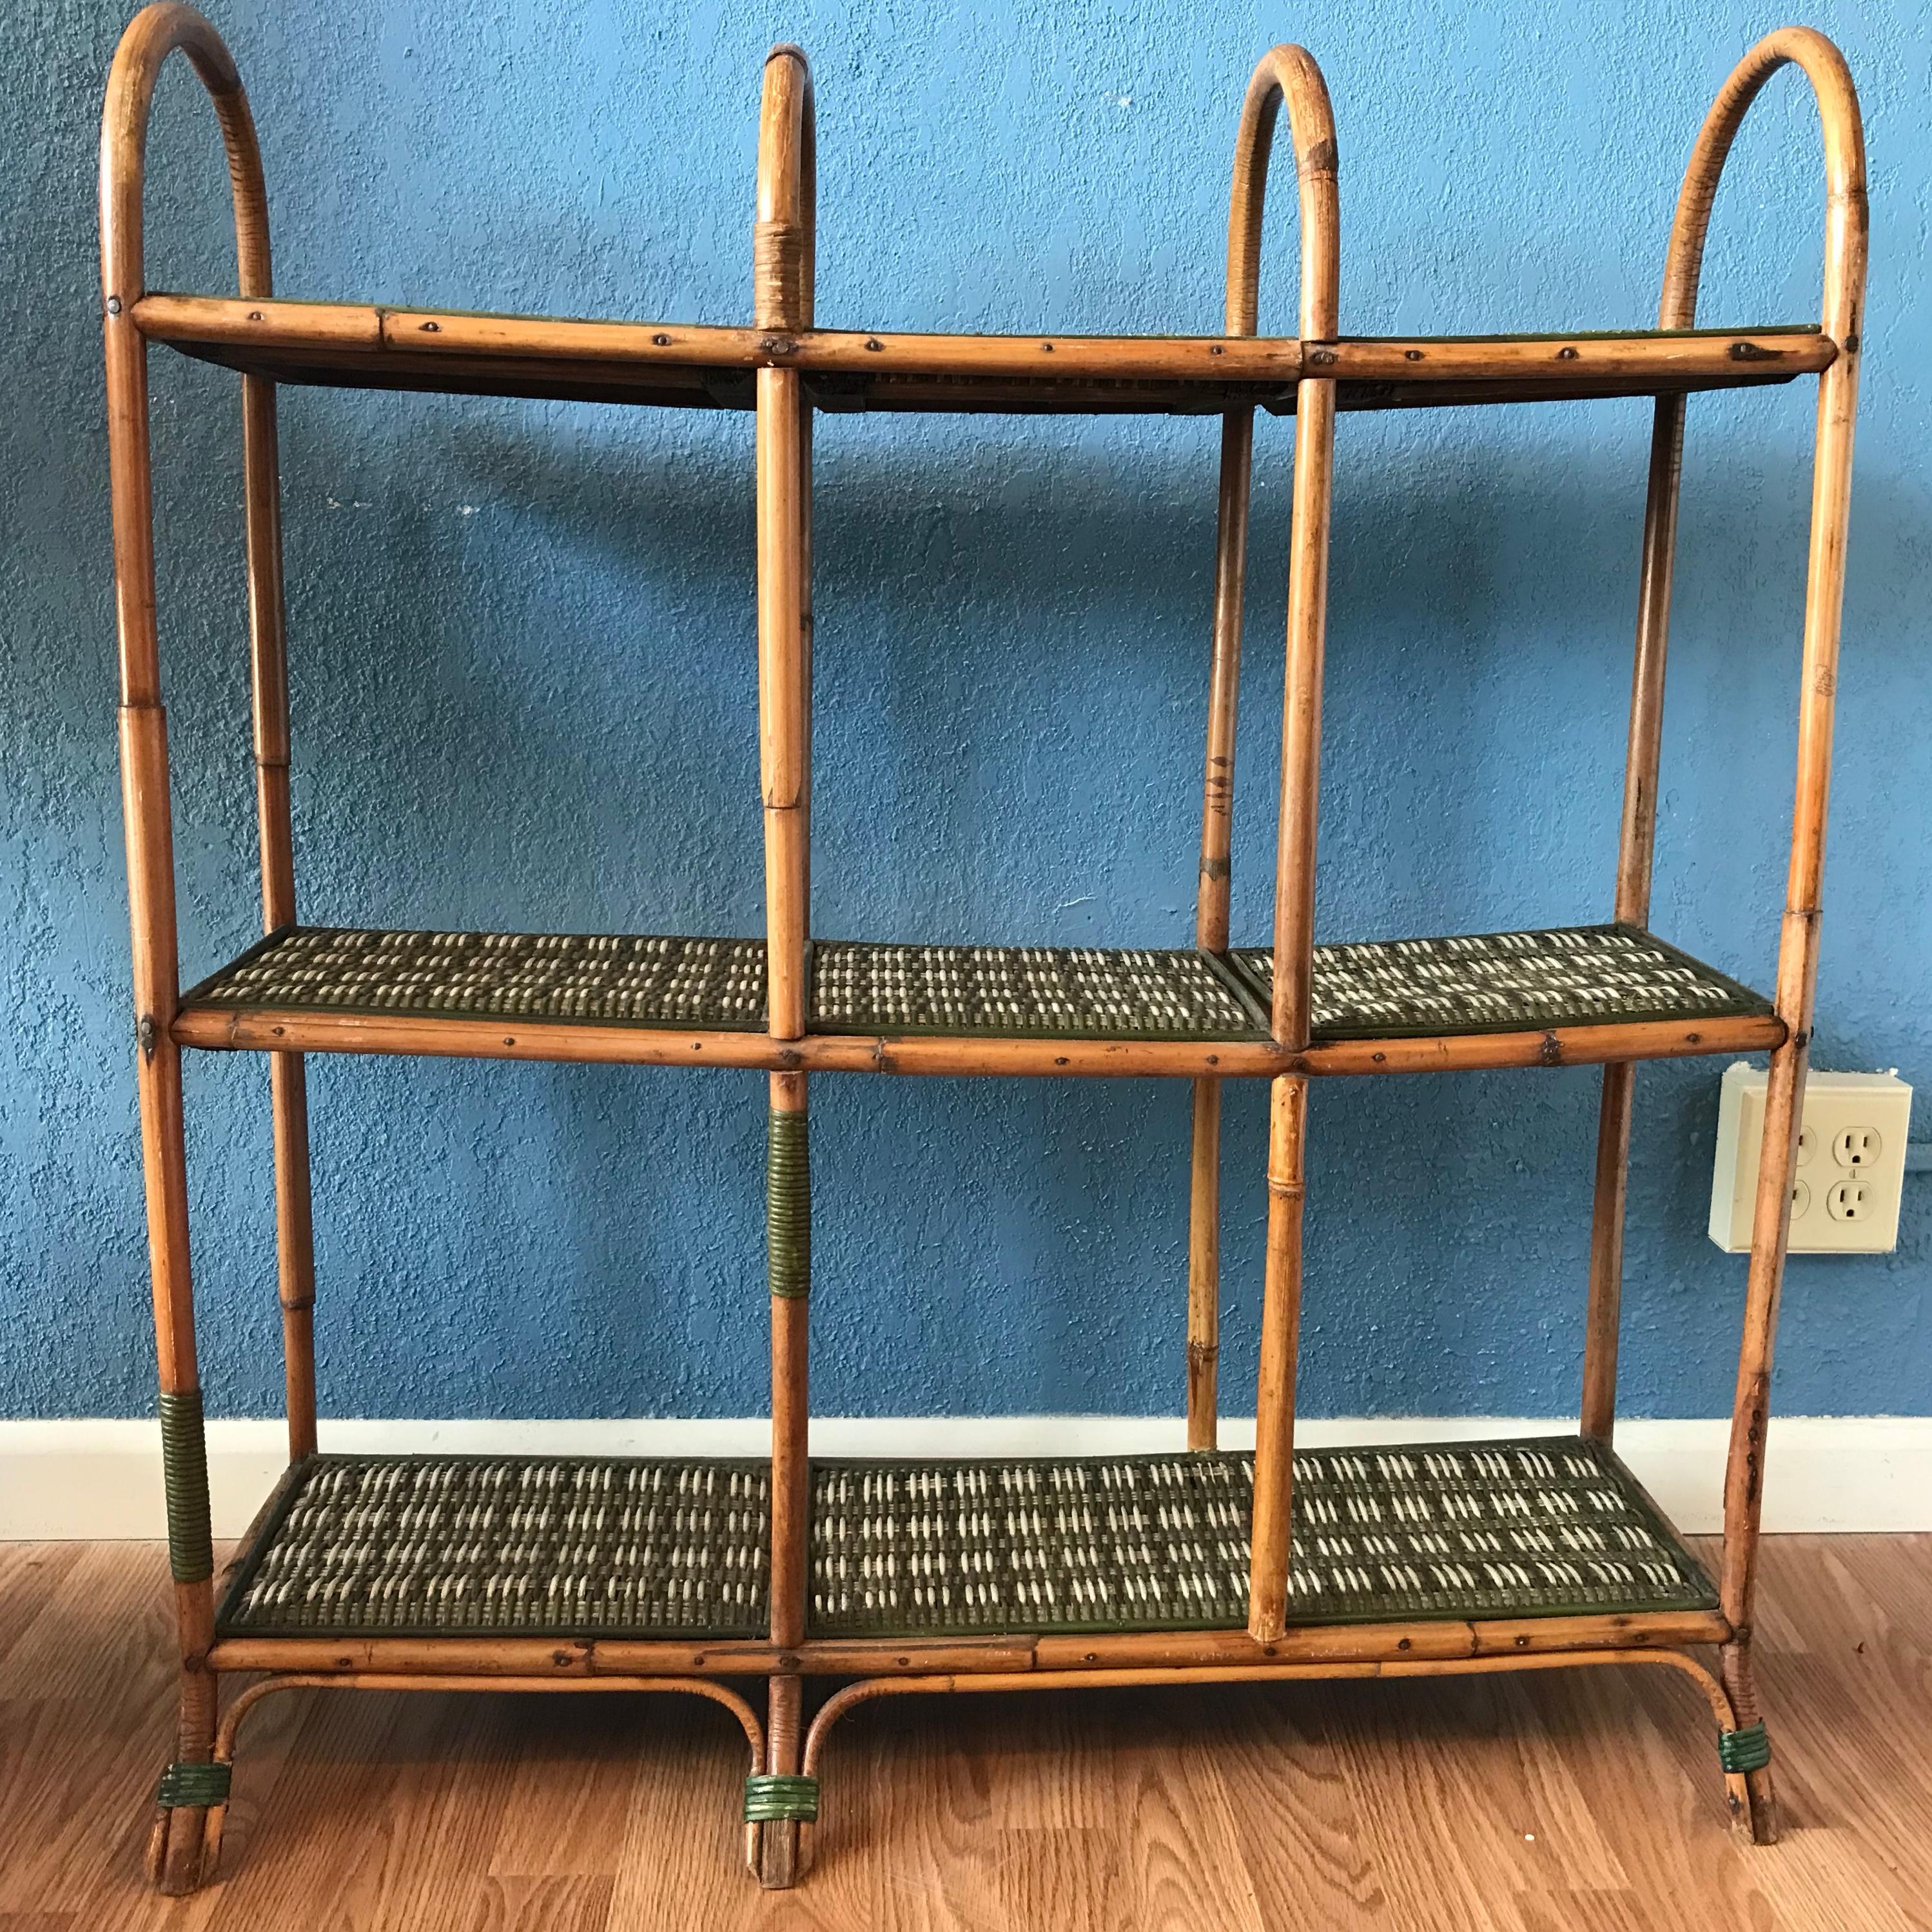 Vintage French Pastry Shelves 4